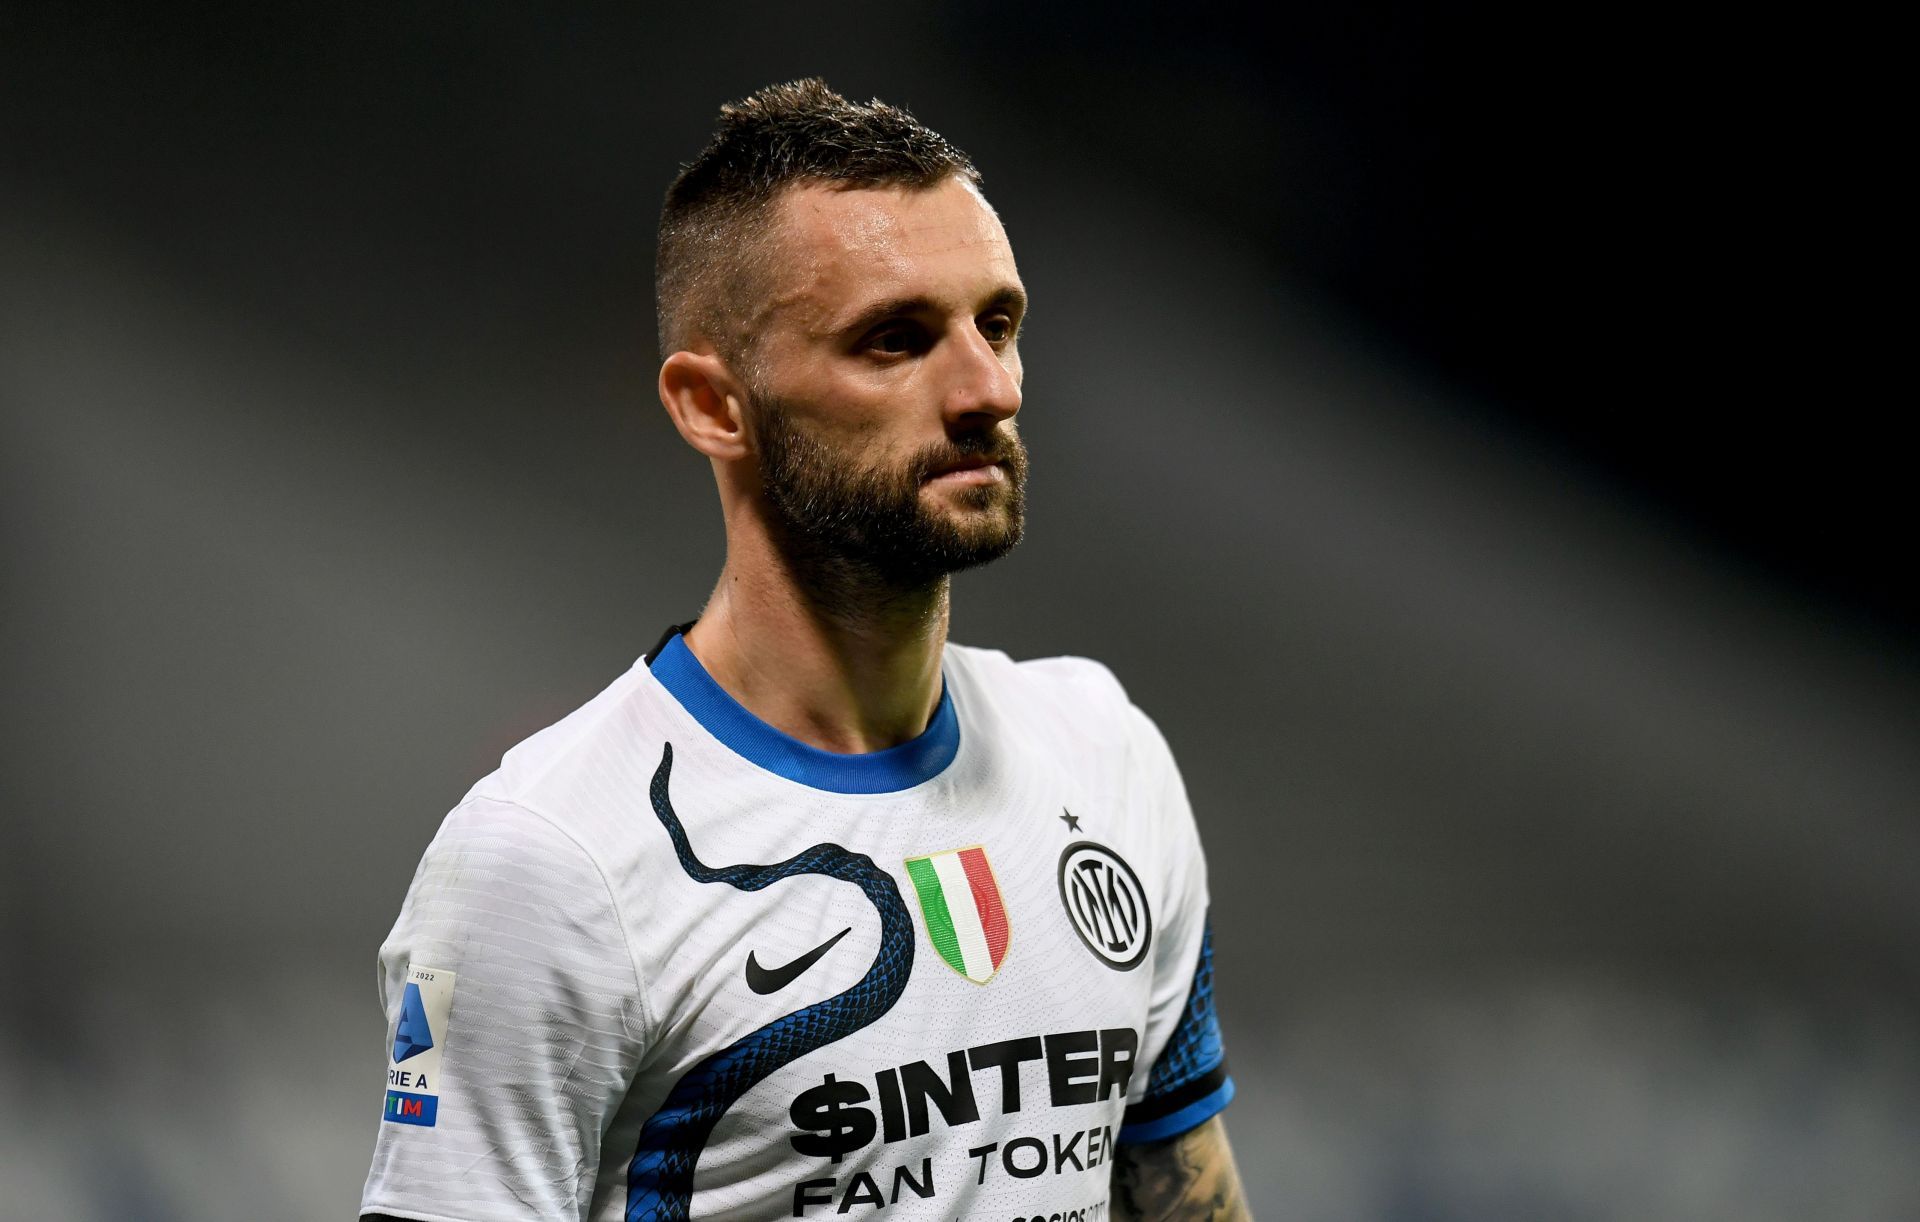 Real Madrid are ready to offer Marcelo Brozovic &euro;7-8 million to join them next summer.